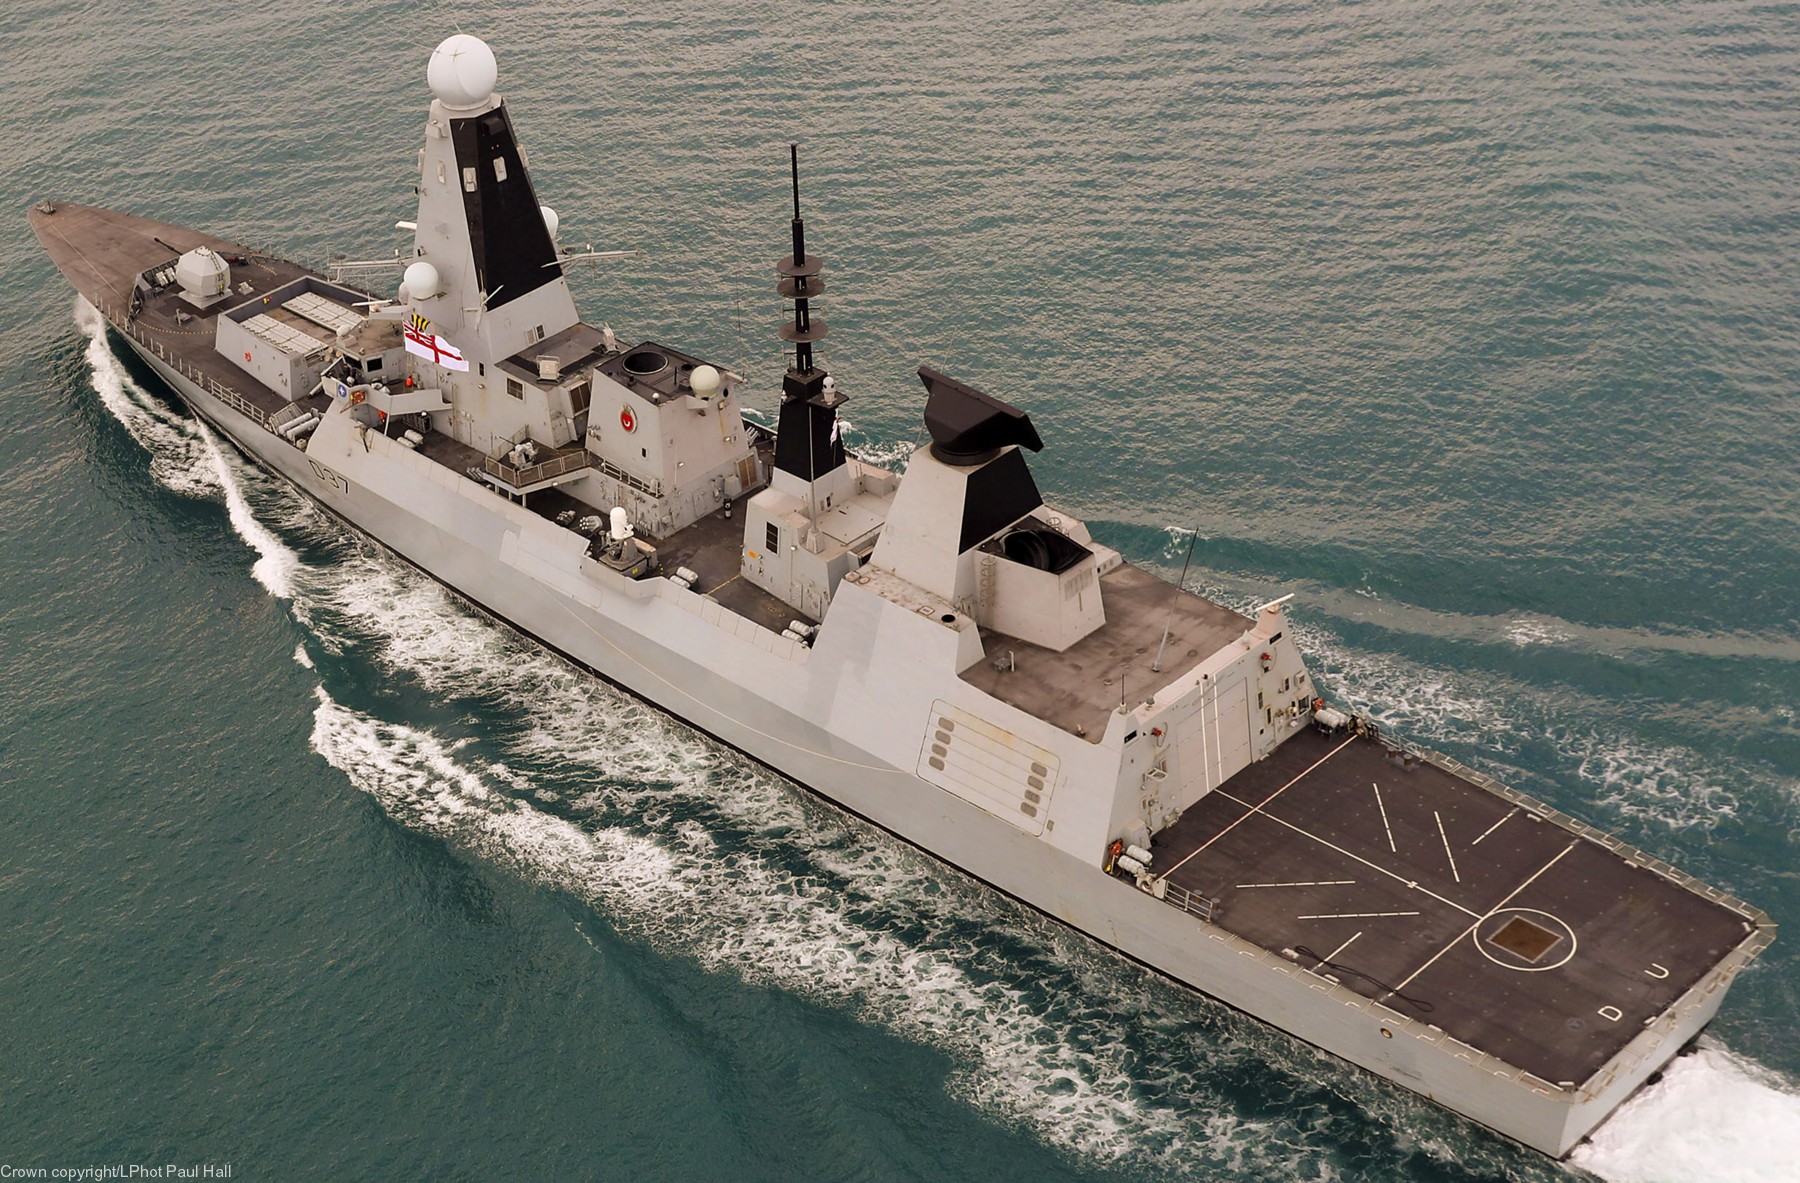 hms duncan d-37 type 45 daring class guided missile destroyer ddg royal navy sea viper paams 26